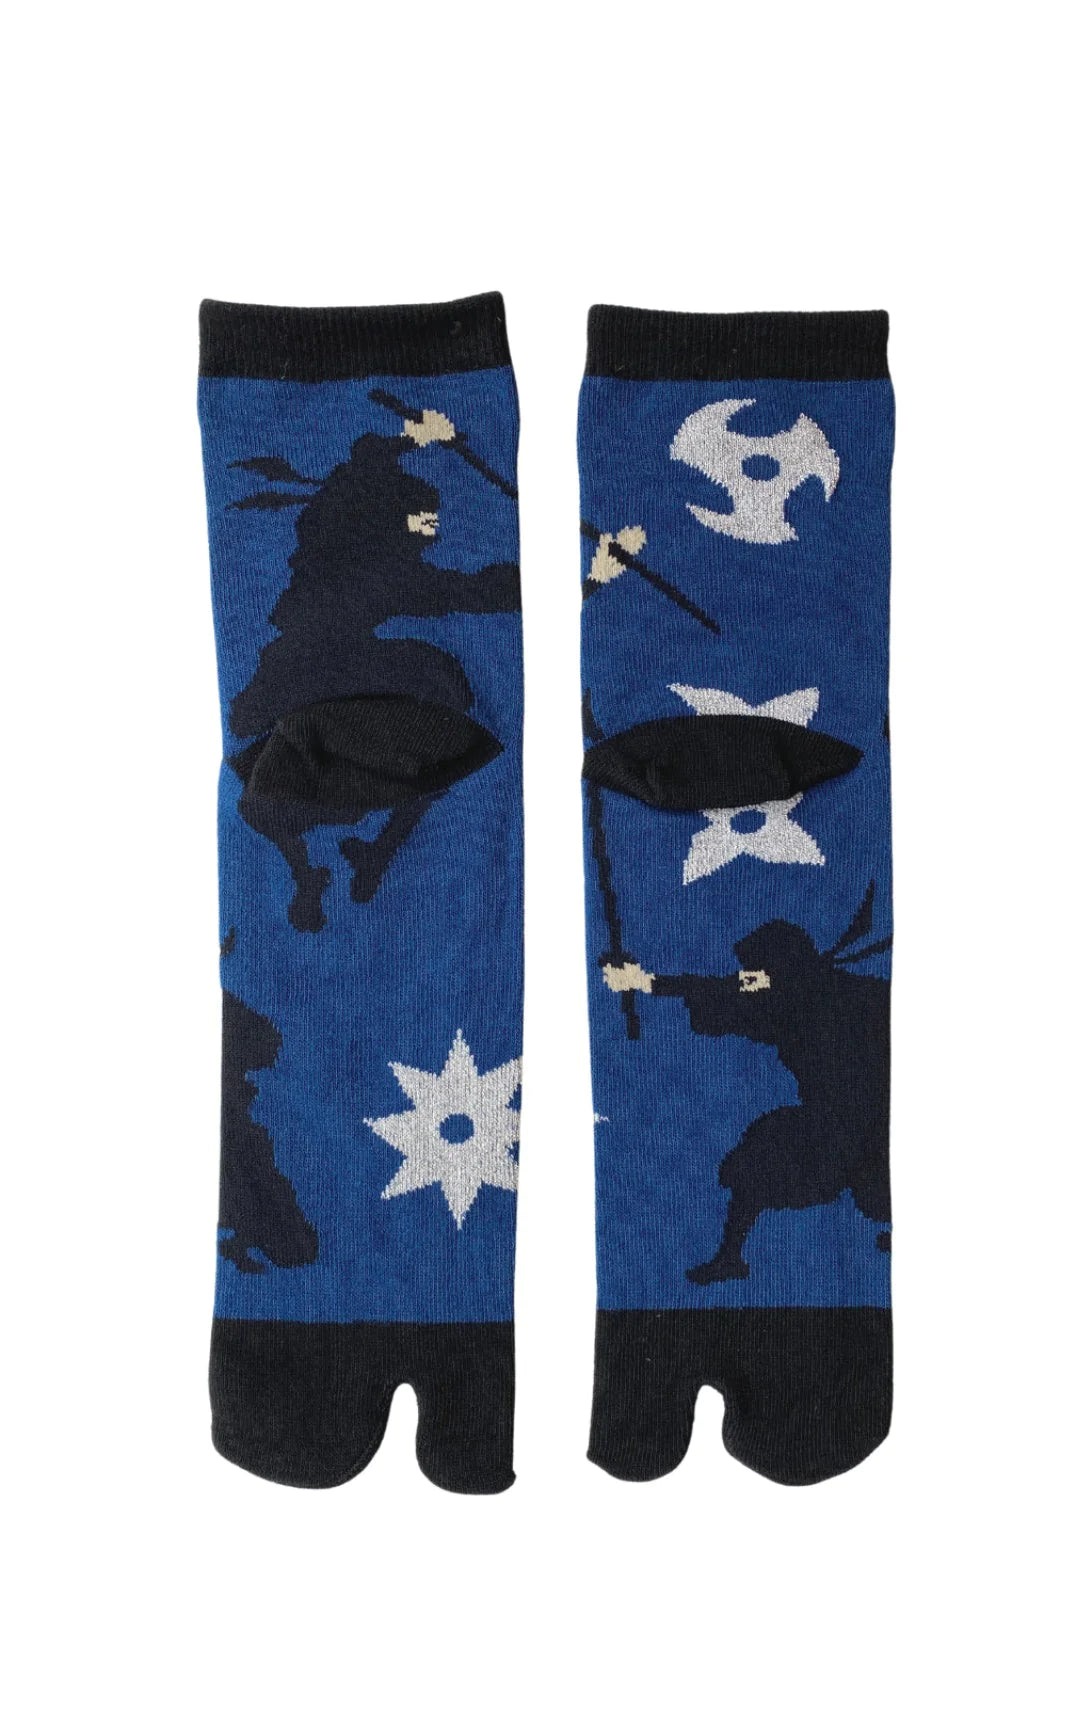 Socks with the trade name Ninja Tabi Toe Socks by NINJA SOCKS, back view in BLUE BLACK color with a design of a ninja fighting with a sword